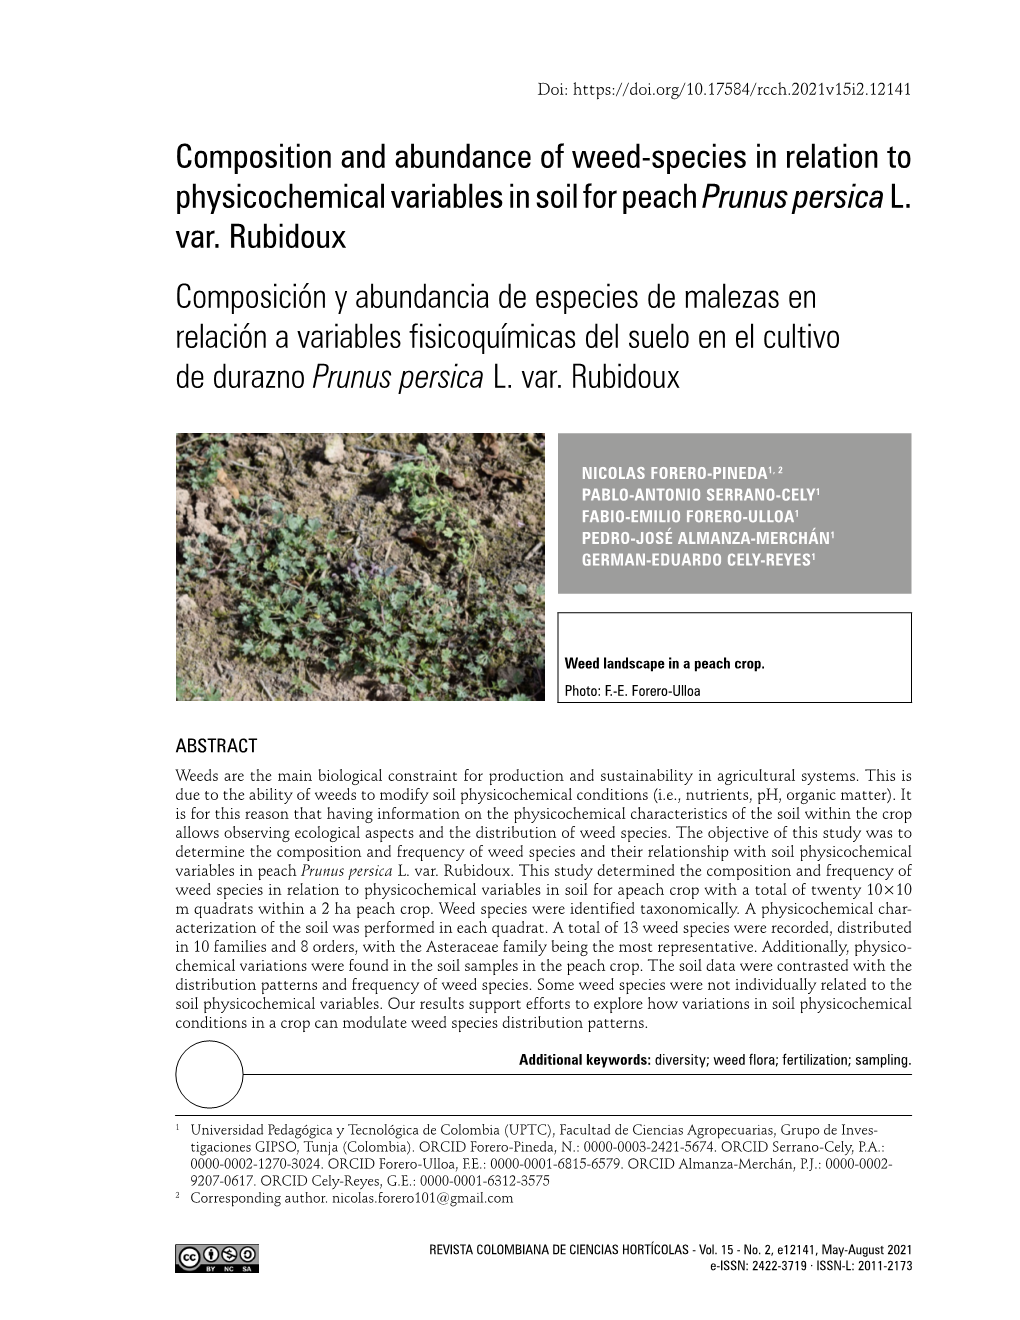 Composition and Abundance of Weed-Species in Relation to Physicochemical Variables in Soil for Peach Prunus Persica L